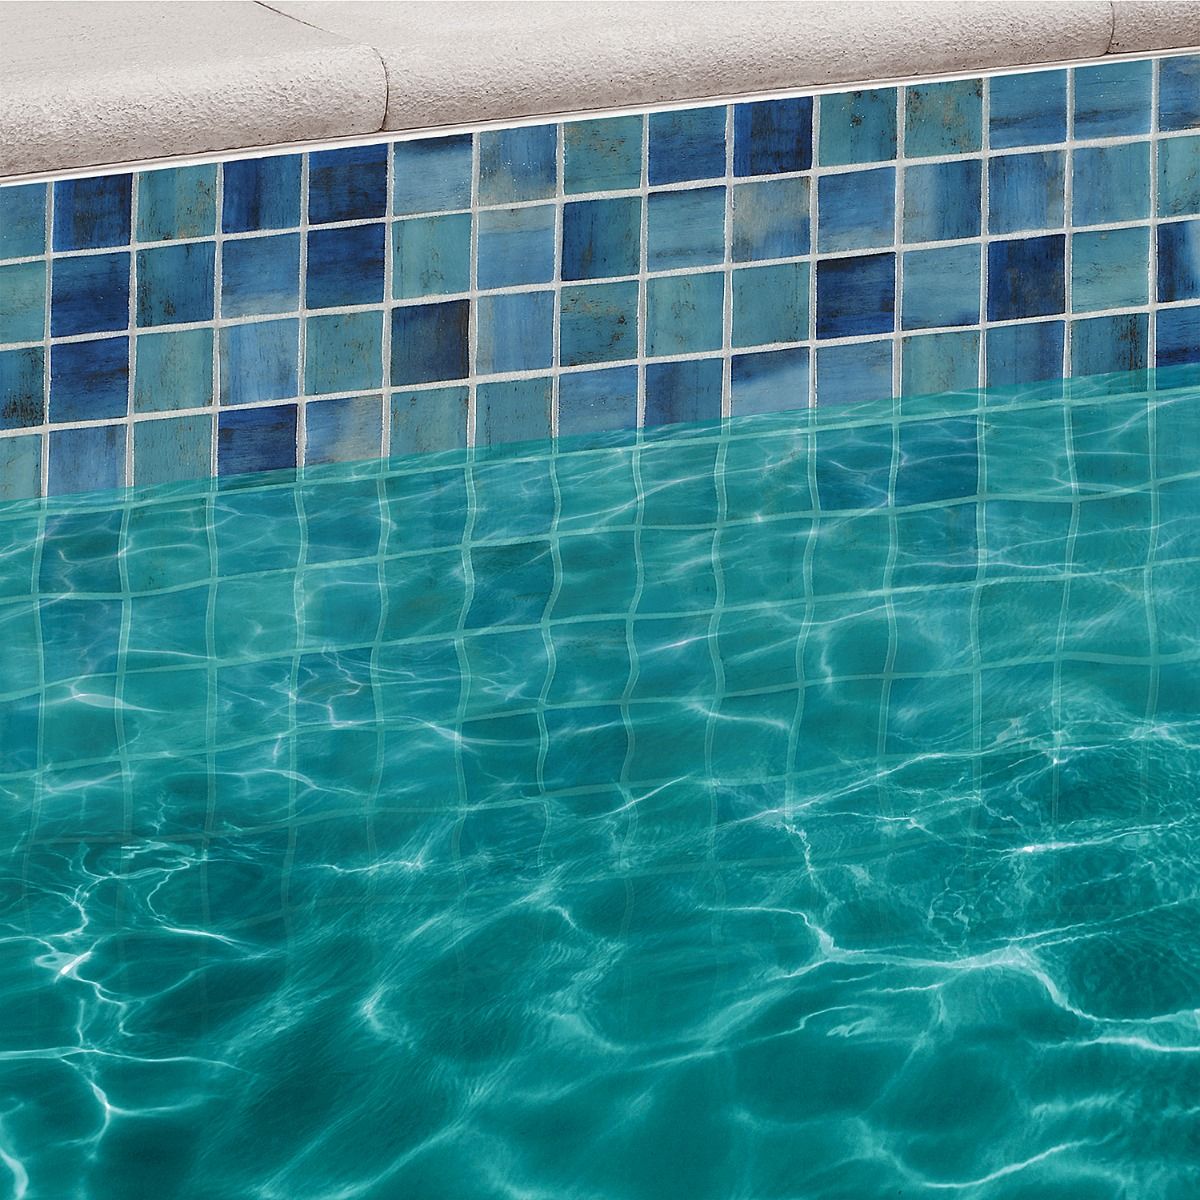 SWIM pool tile collection shown at water surface